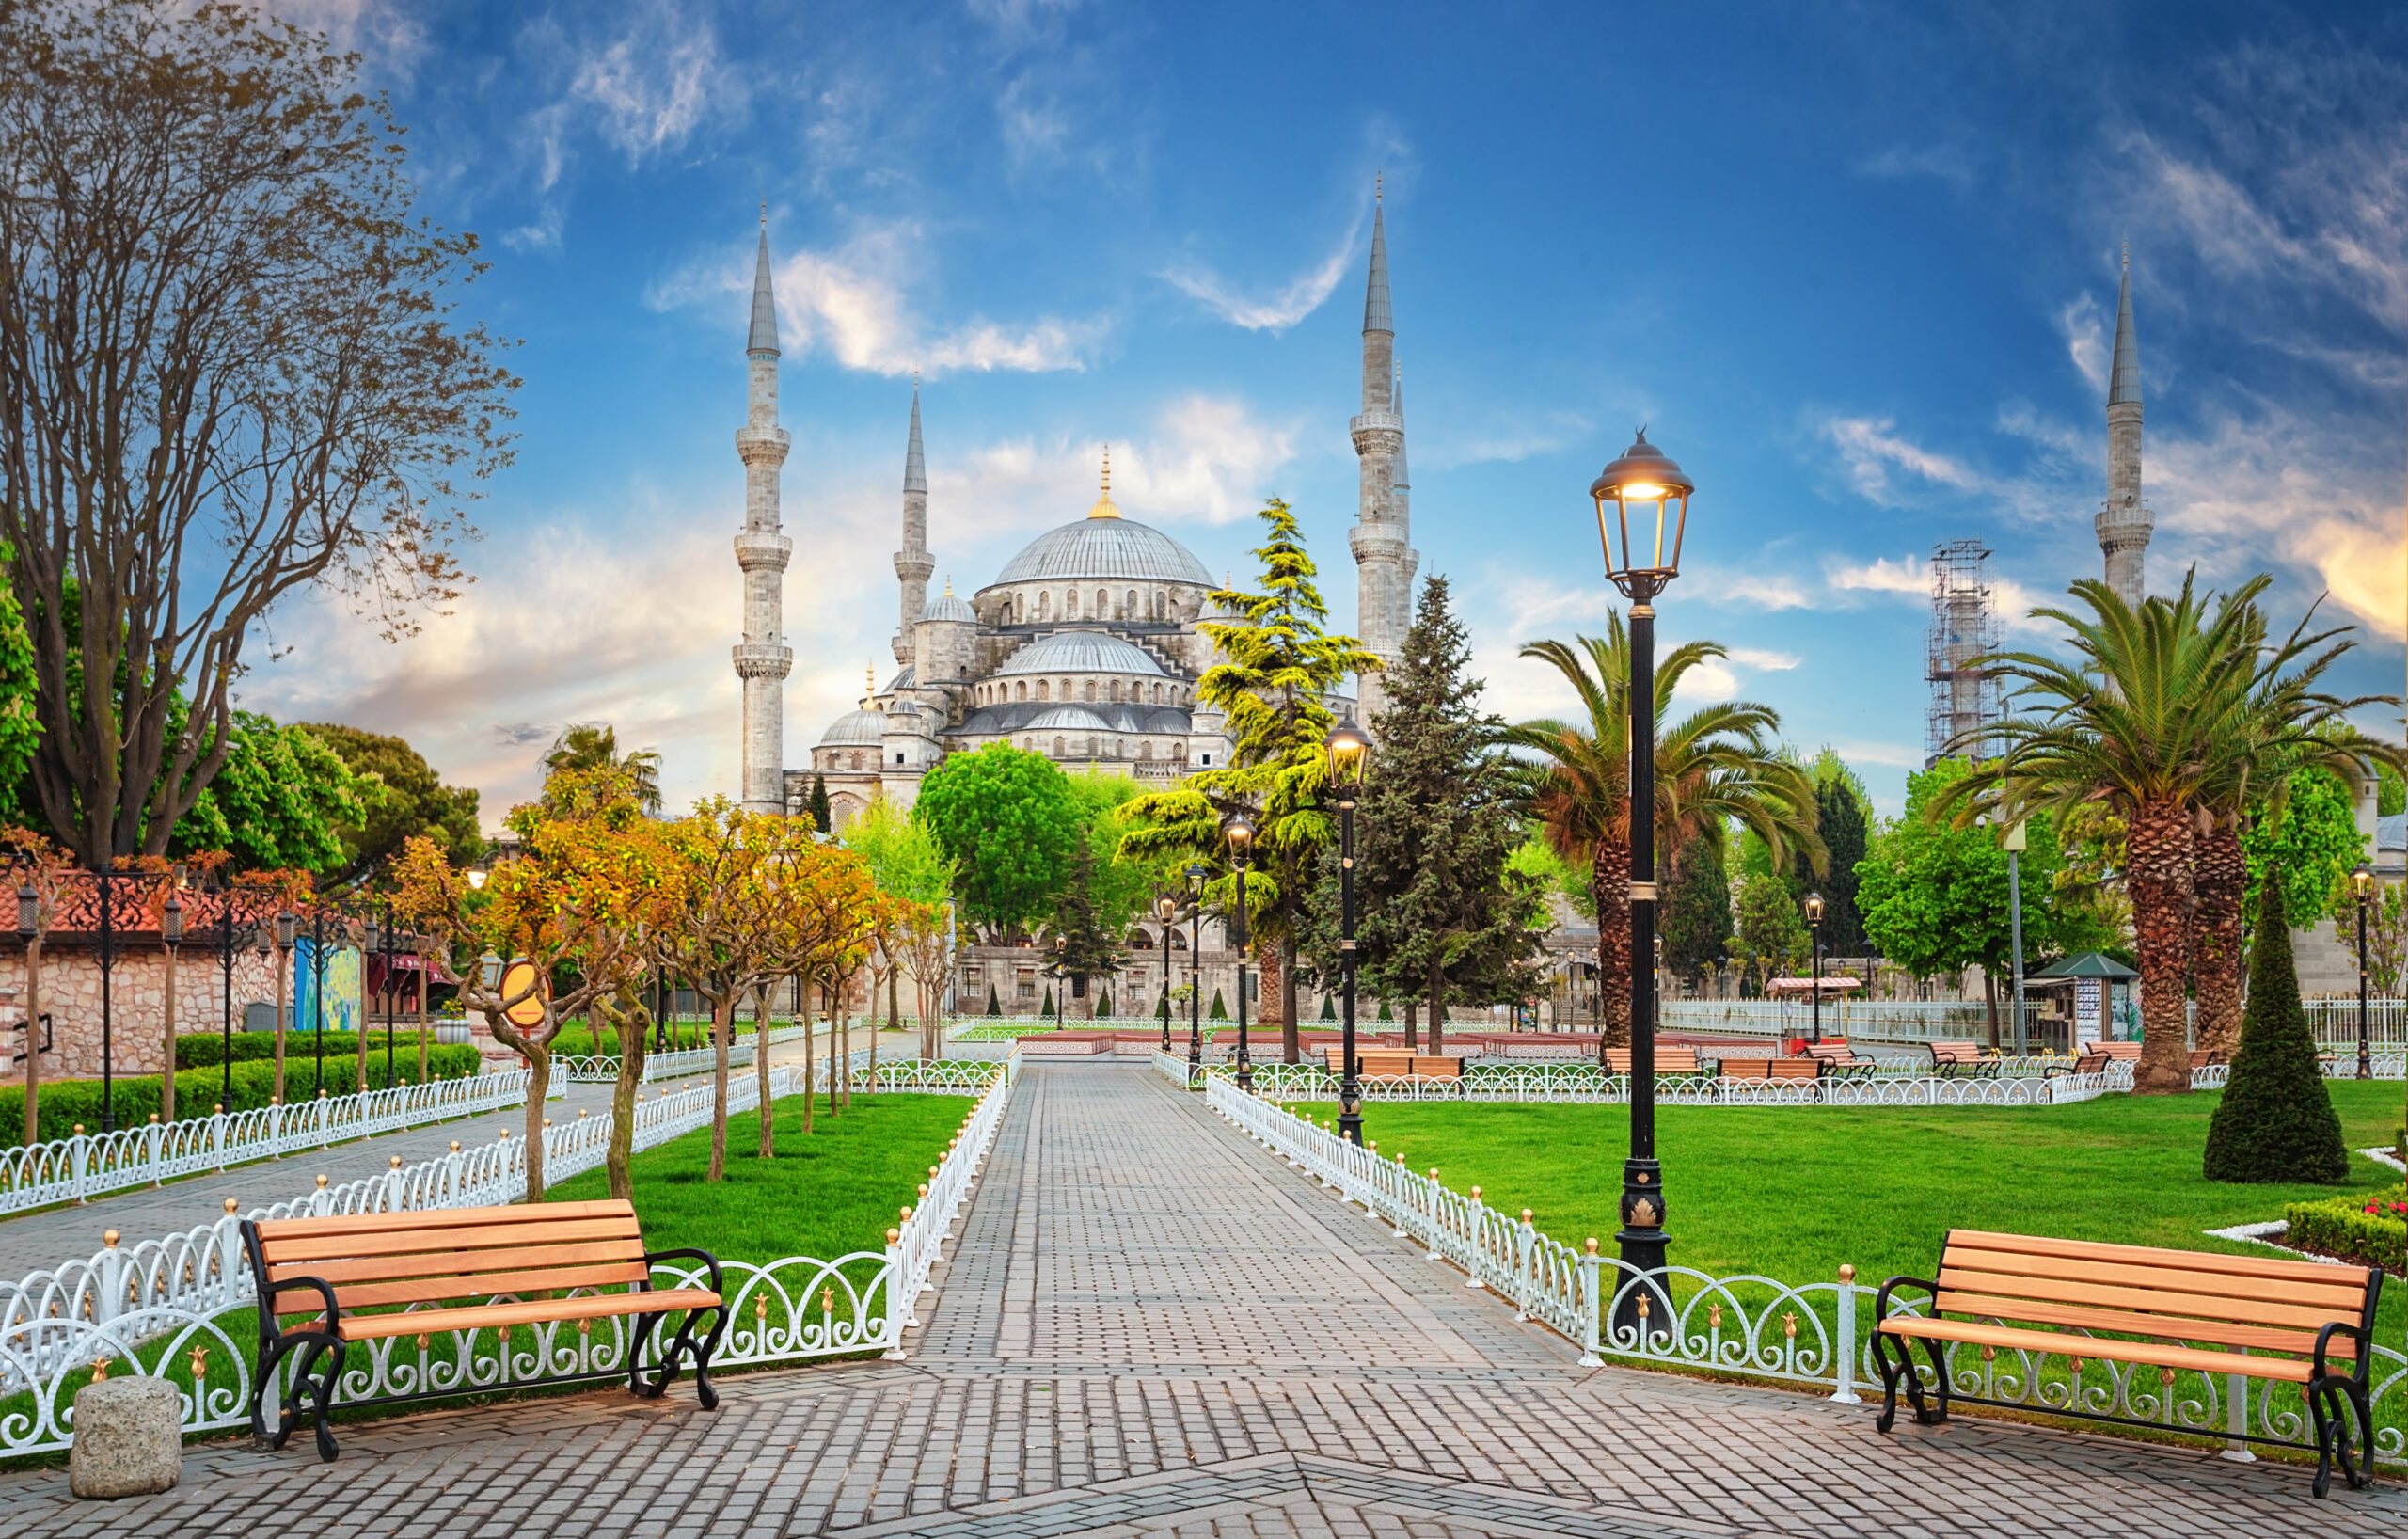 Sultanahmet Mosque or Blue Mosque in Istanbul by day. Park and lawns with green grass in the foreground. Turkey